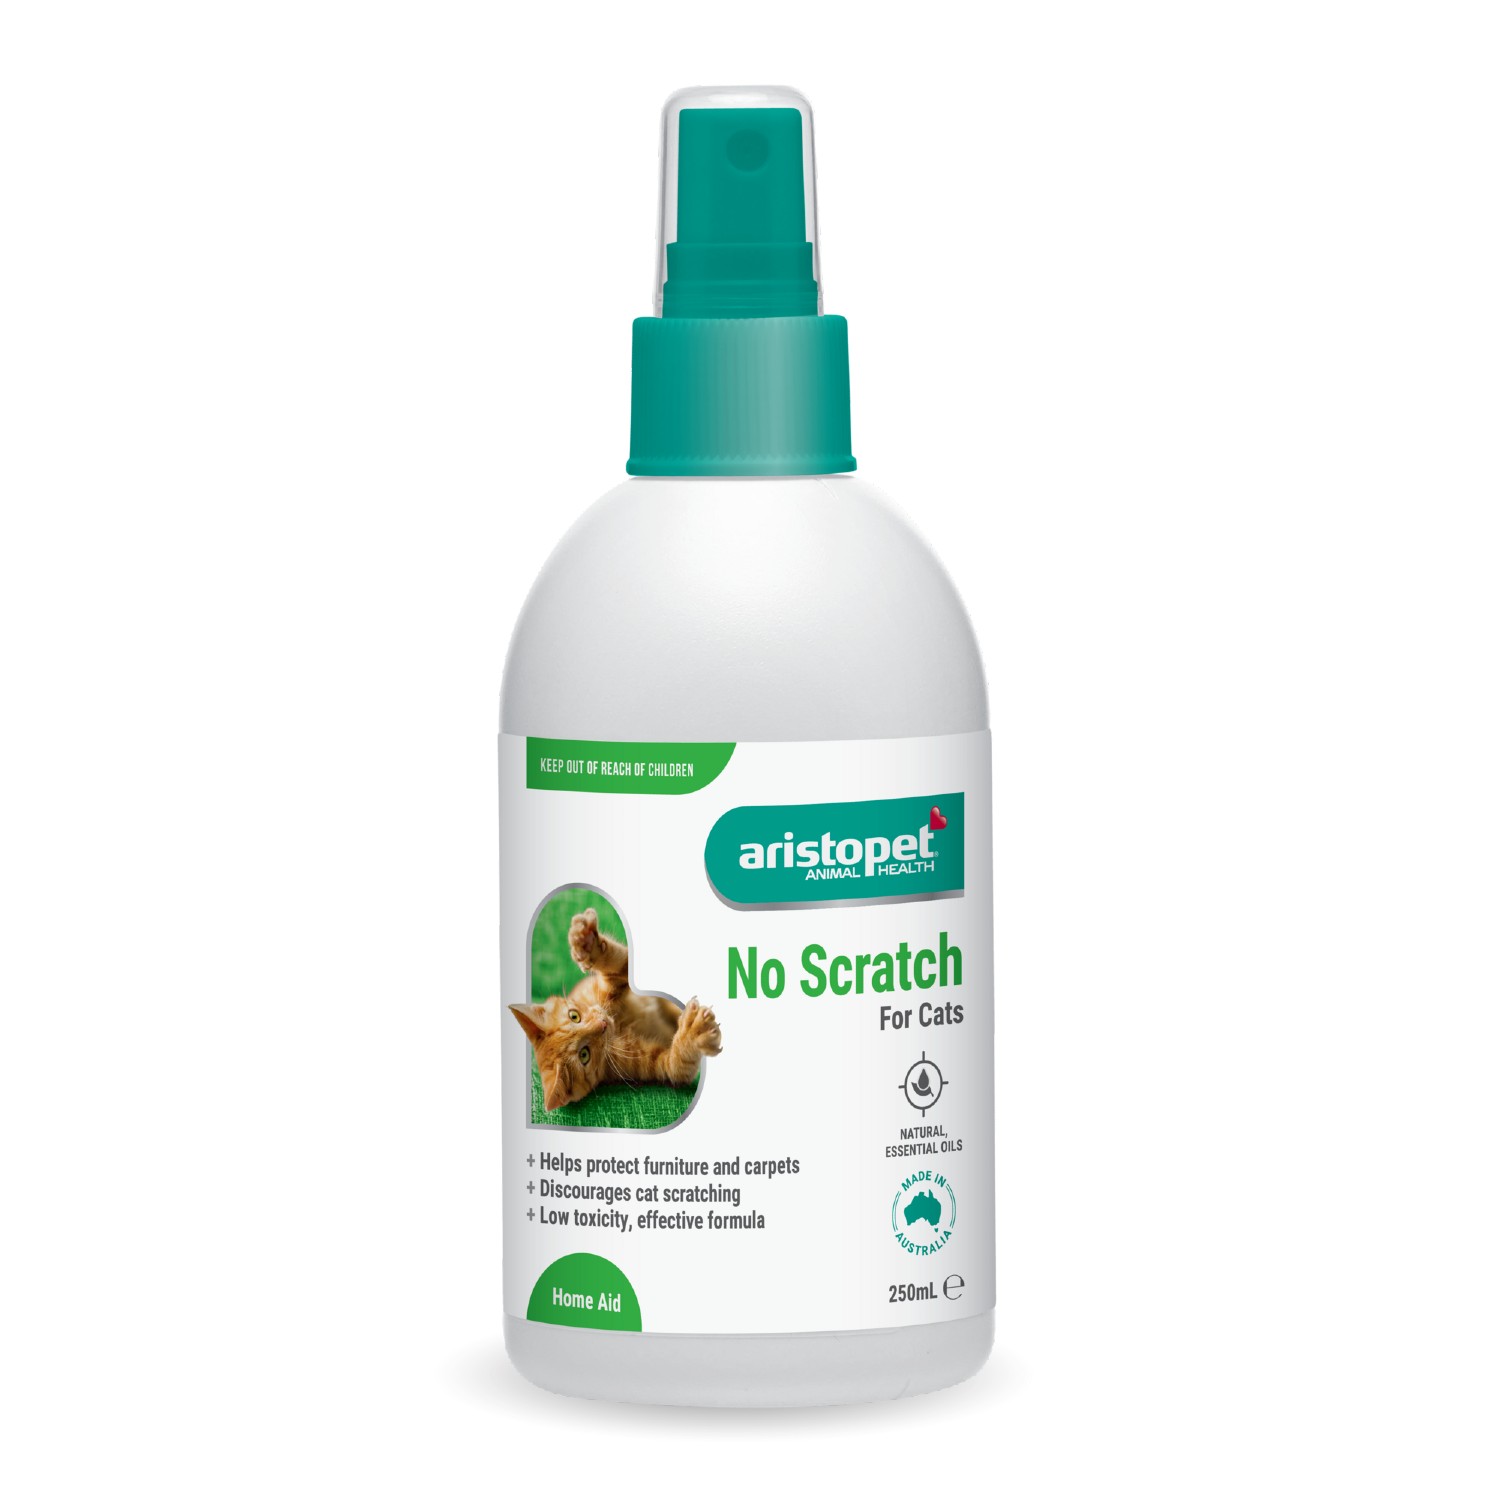 Aristopet No Scratch Spray for Cats 250mL